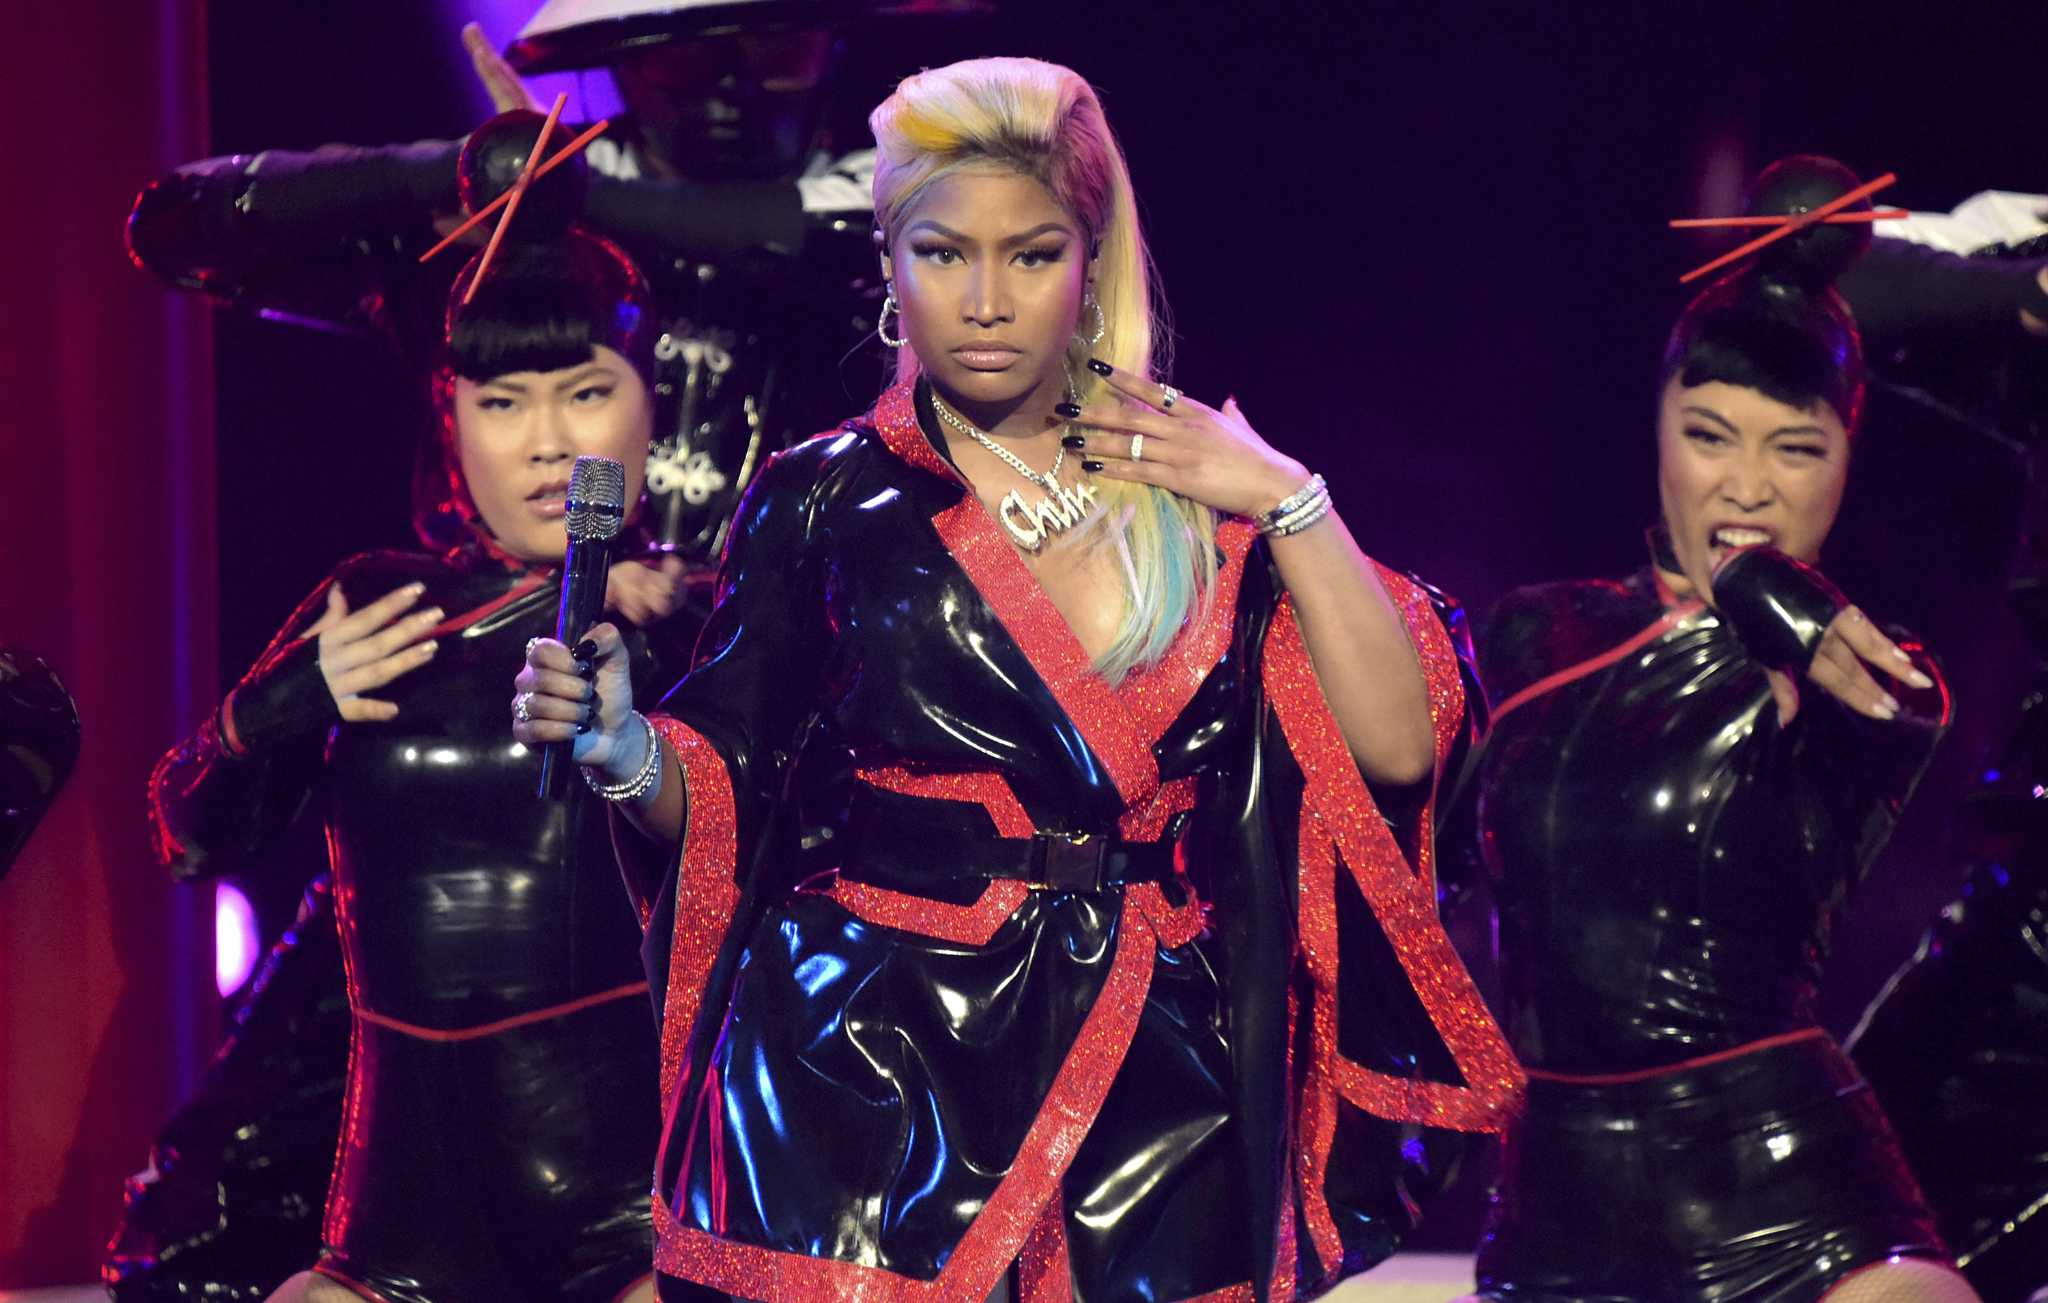 Nicki Minaj cancels North American tour with Future, including Houston date